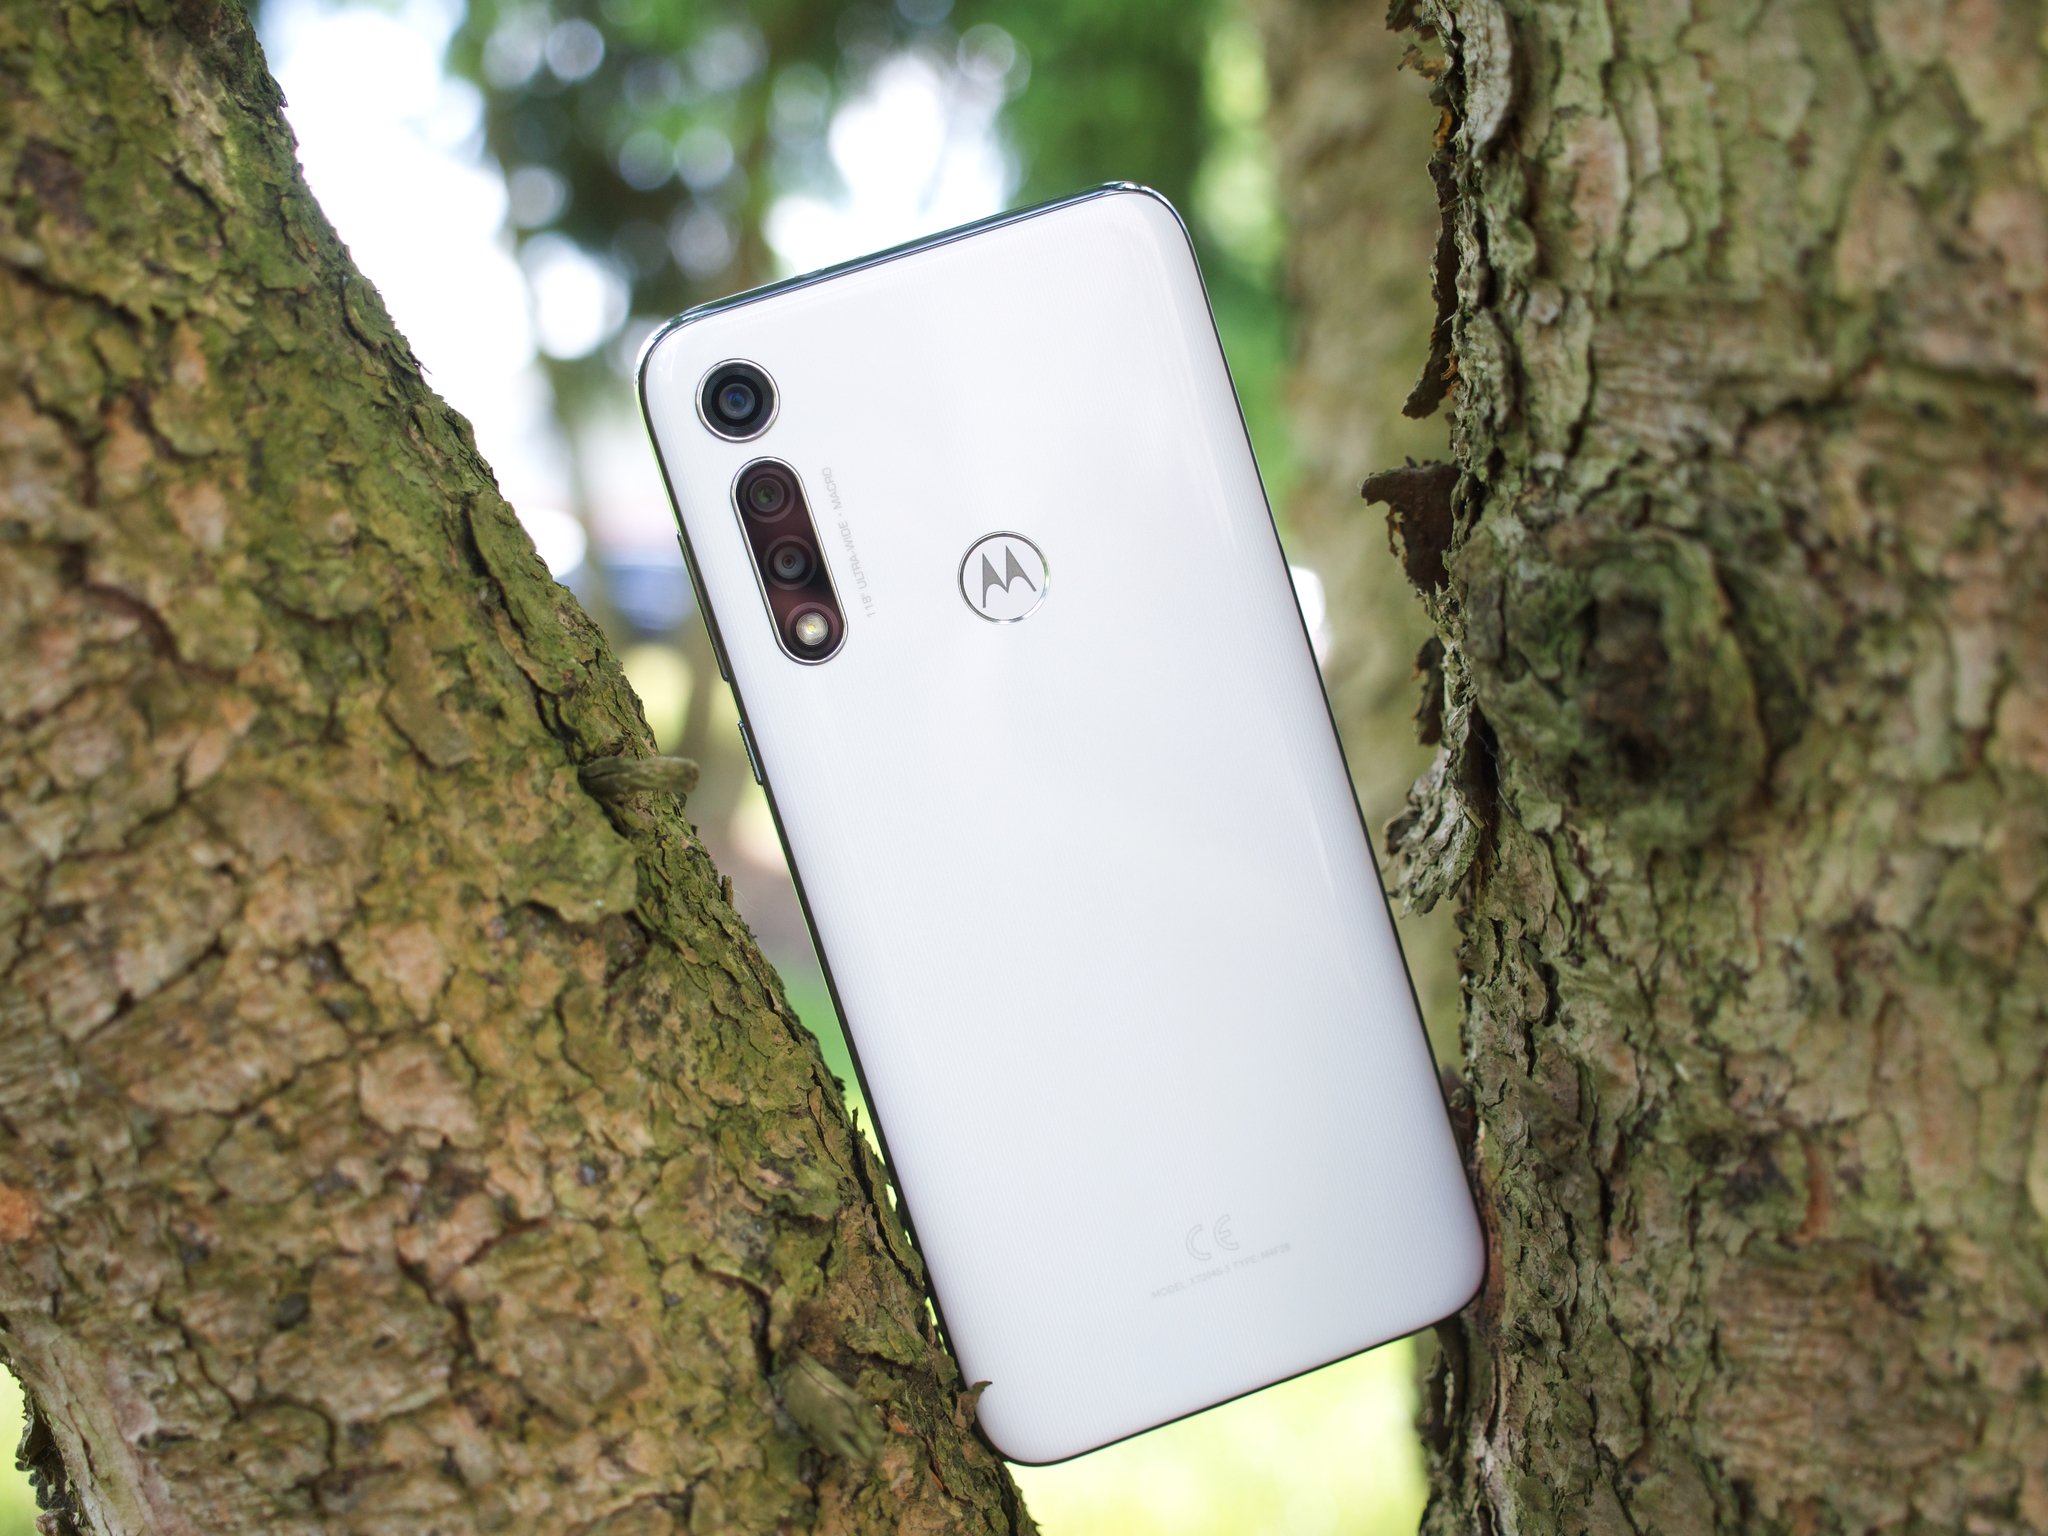 Motorola Moto G4 Play review: Our second-favorite super-budget phone - CNET